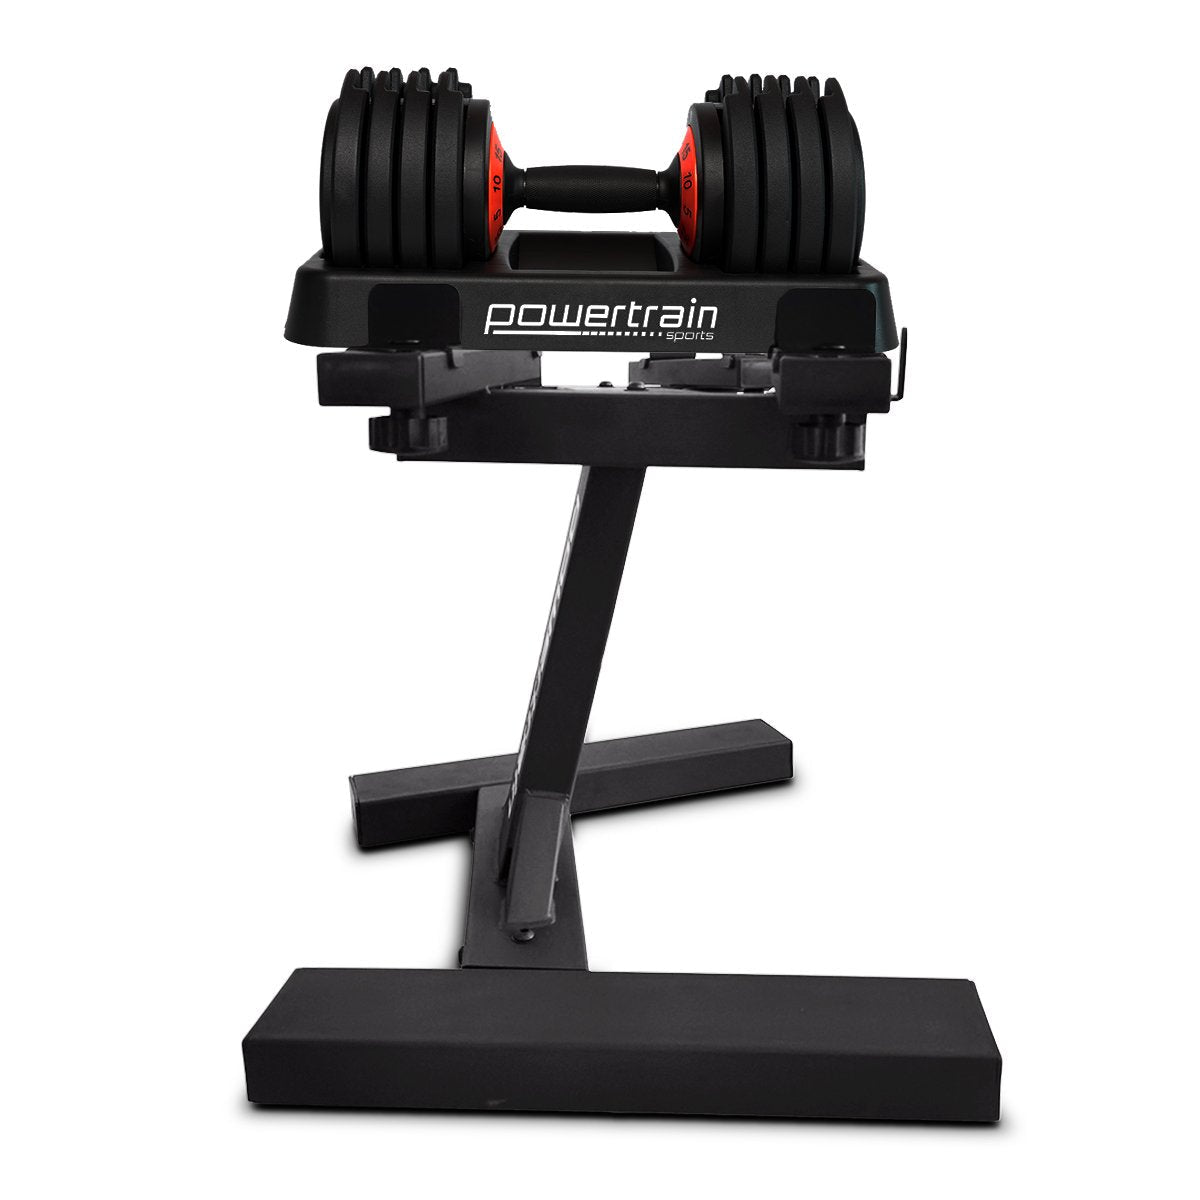 Sports & Fitness > Fitness Accessories - Powertrain GEN2 Pro Adjustable Dumbbell Set - 2 X 25kg (50kg) Home Gym Weights With Stand